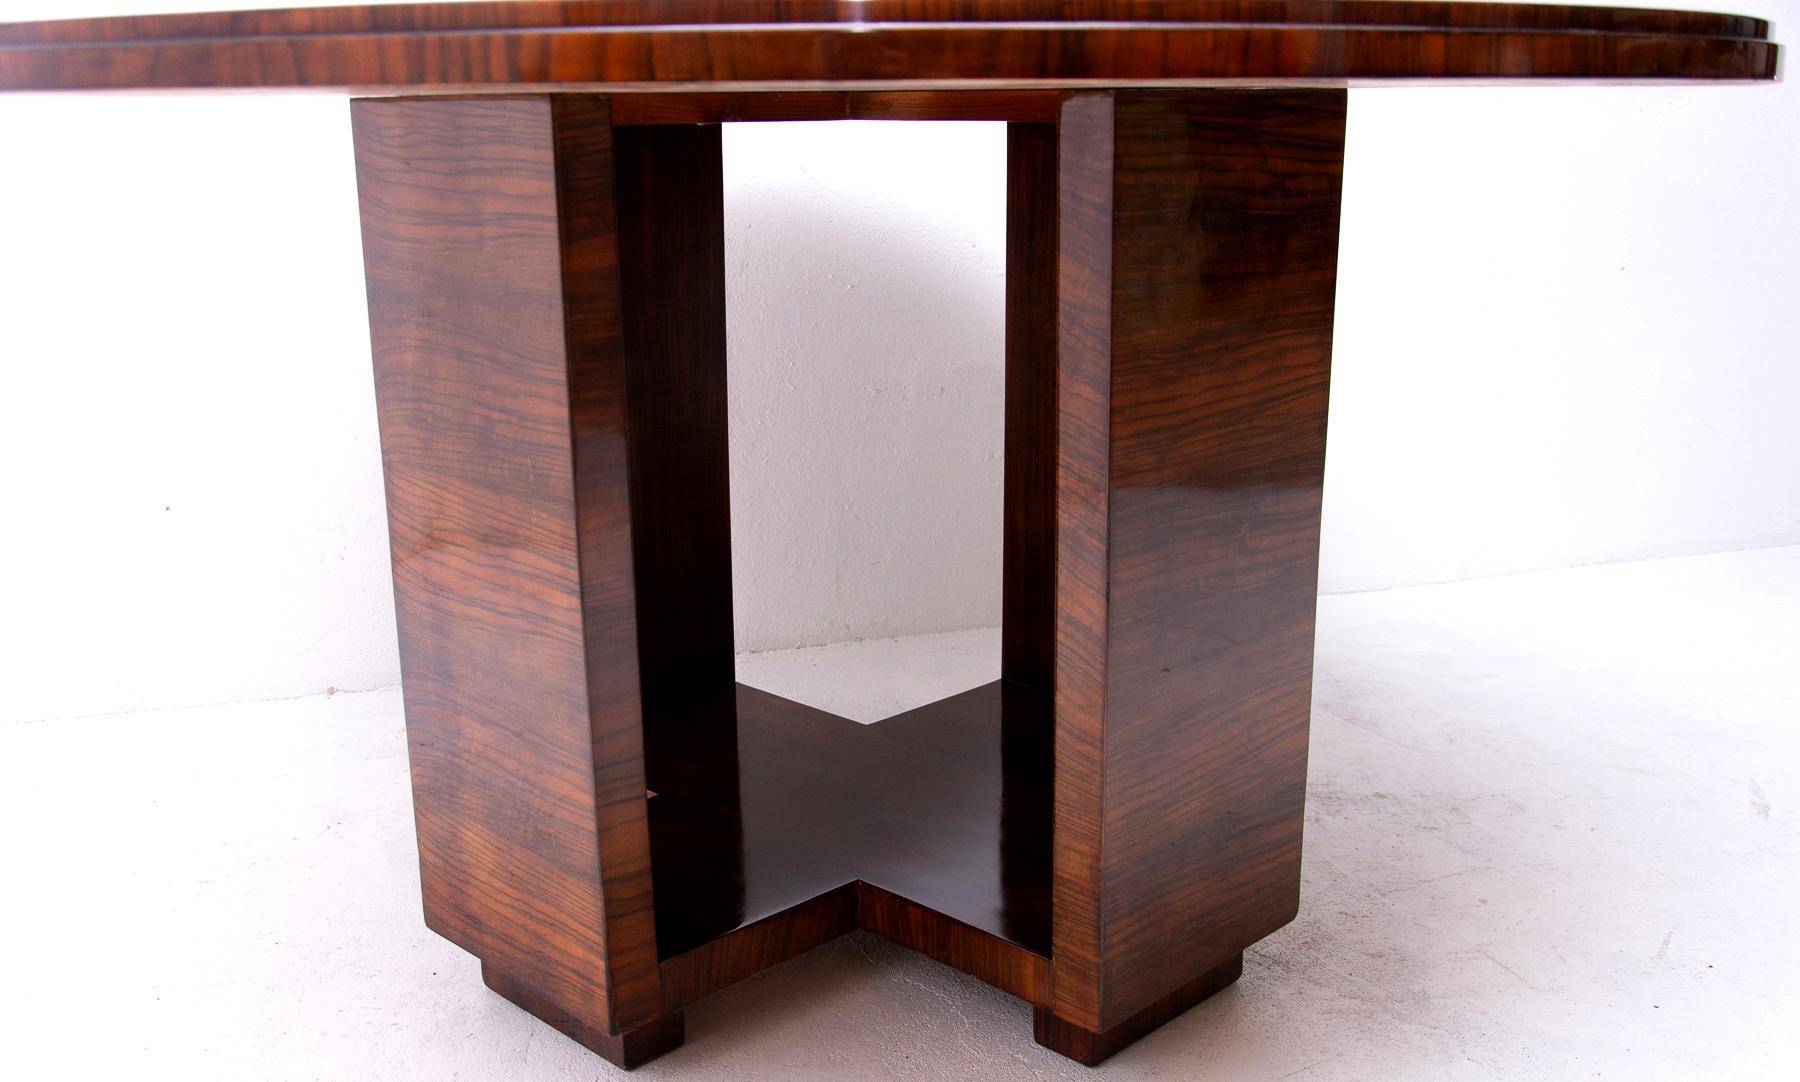 Art Deco Round Dining Table in Walnut by Vlastimil Brozek, 1930s (Holz)